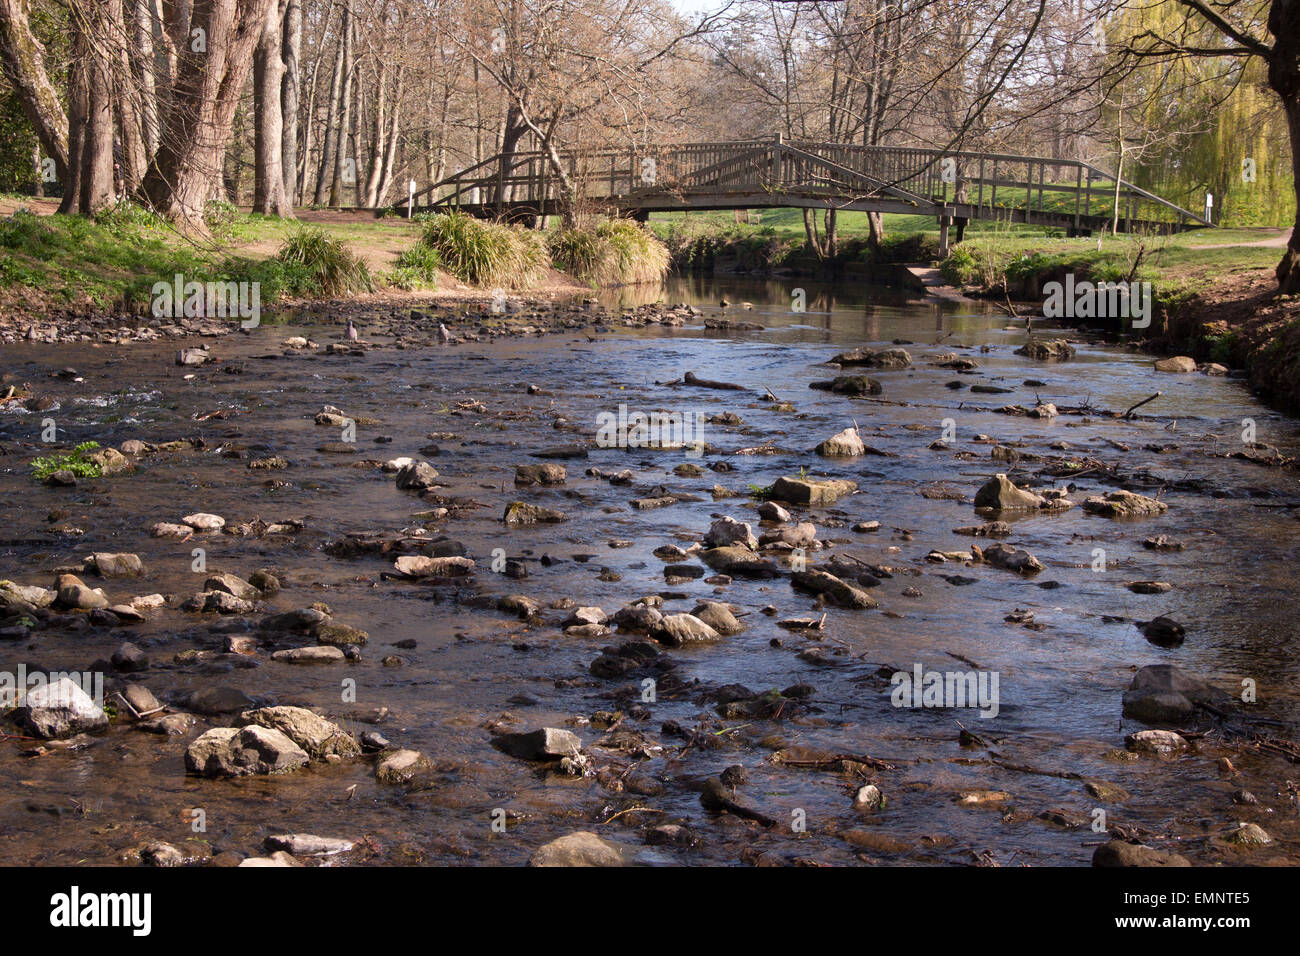 Sidmouth. The river Sid flowing through the Byes, a riverside park, in Sidmouth, Devon. Stock Photo